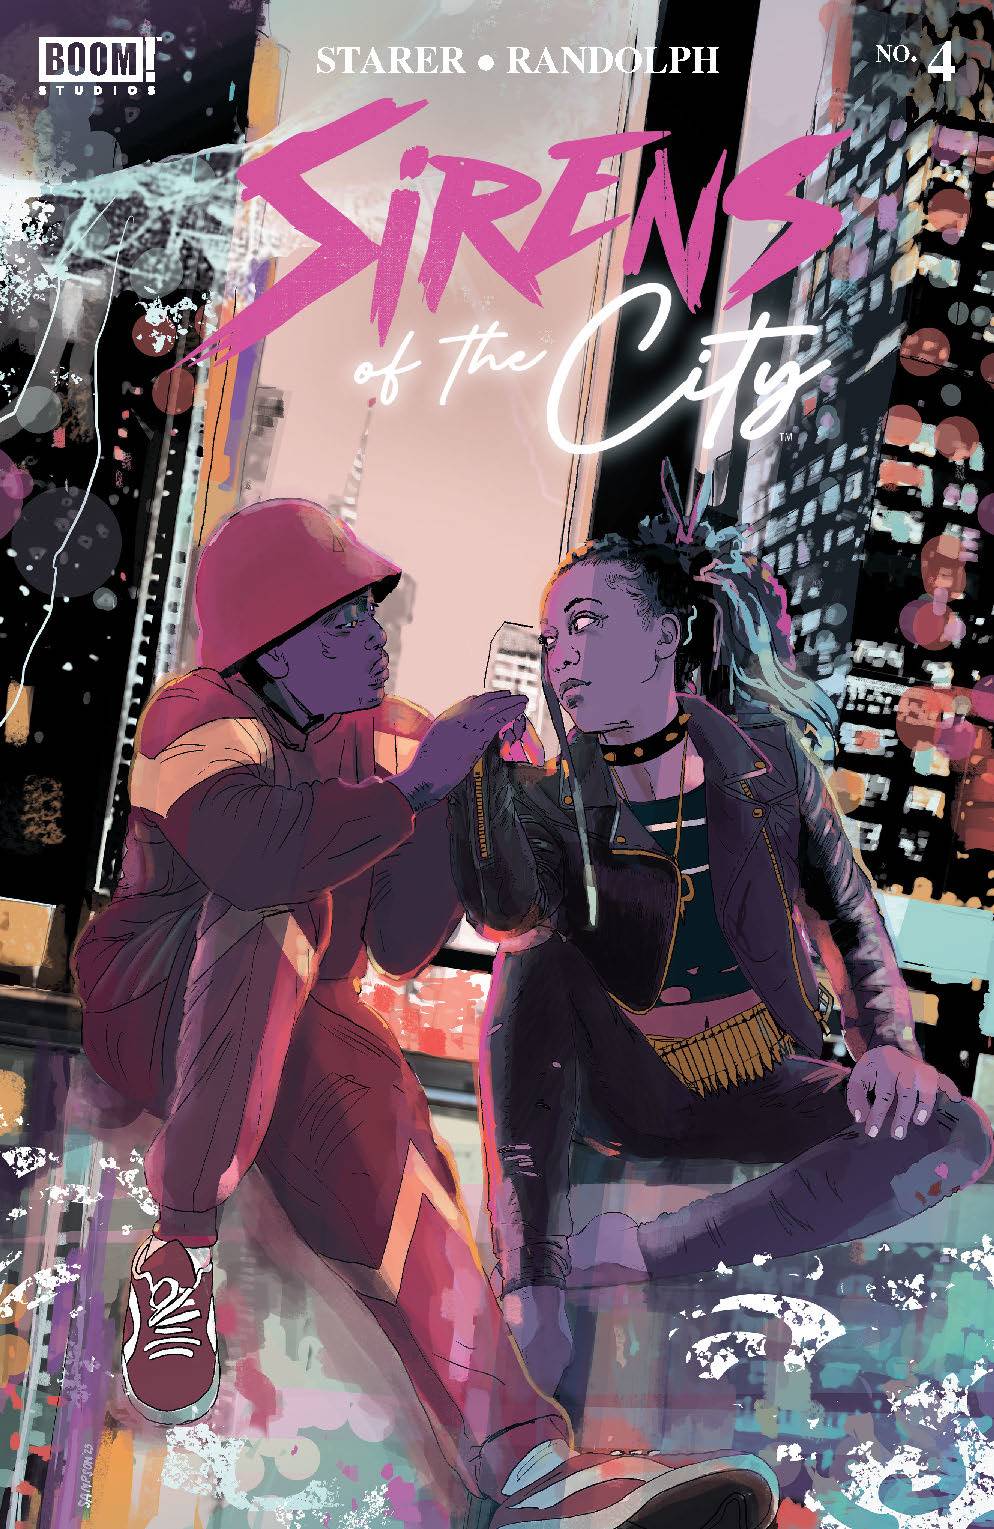 Sirens Of The City #4 (Of 6) Cover E Foc Reveal Variant